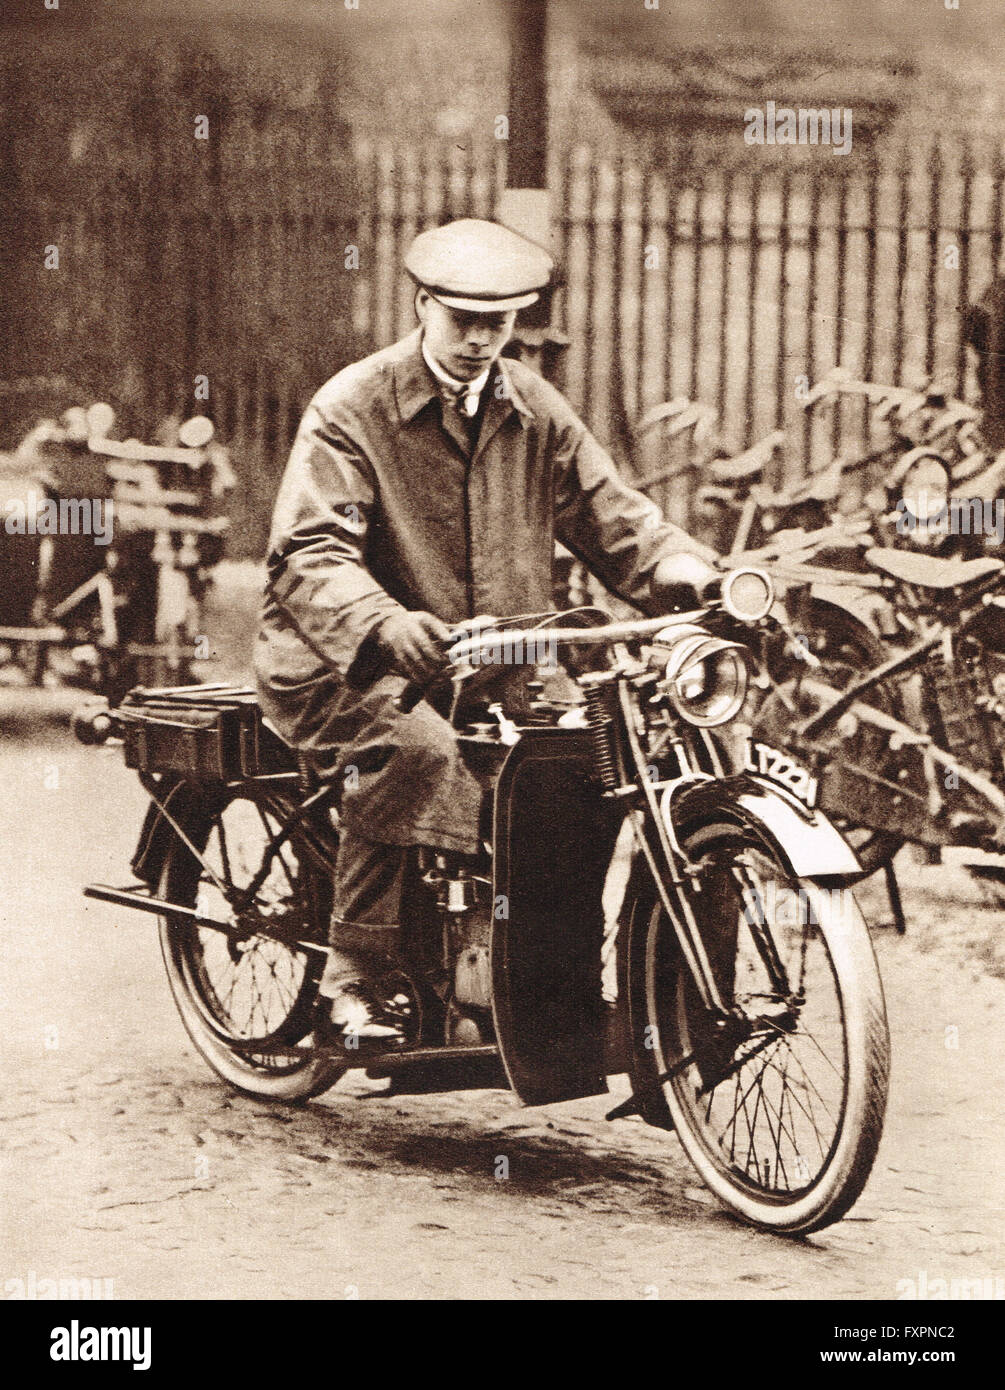 Prince Albert, the future King George VI, on a motorbike at college in Cambridge in 1920 Stock Photo